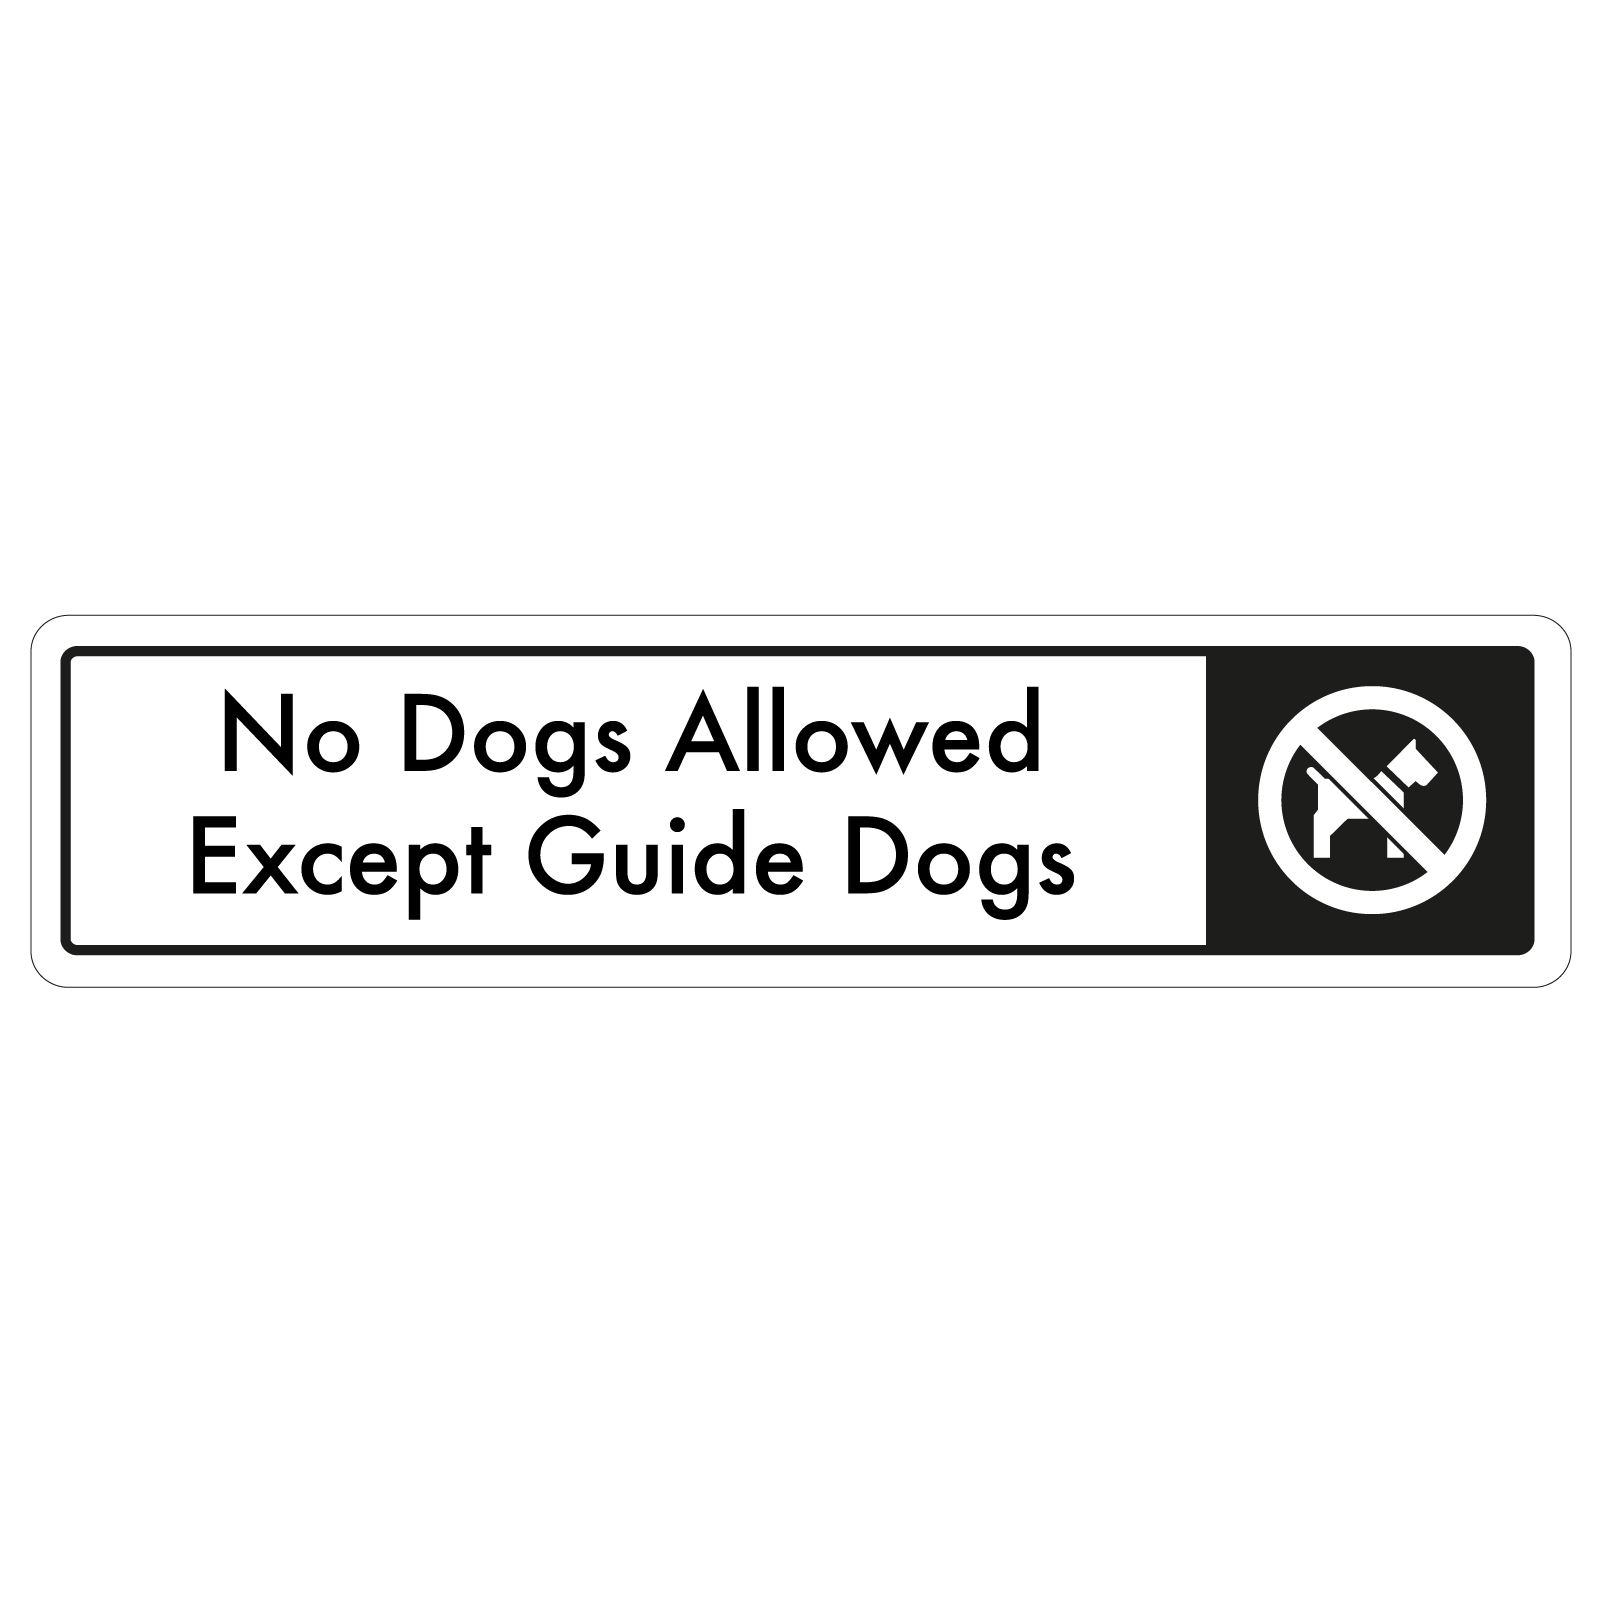 No Dogs Allowed, Except Guide Dogs Door Sign - Black on White 